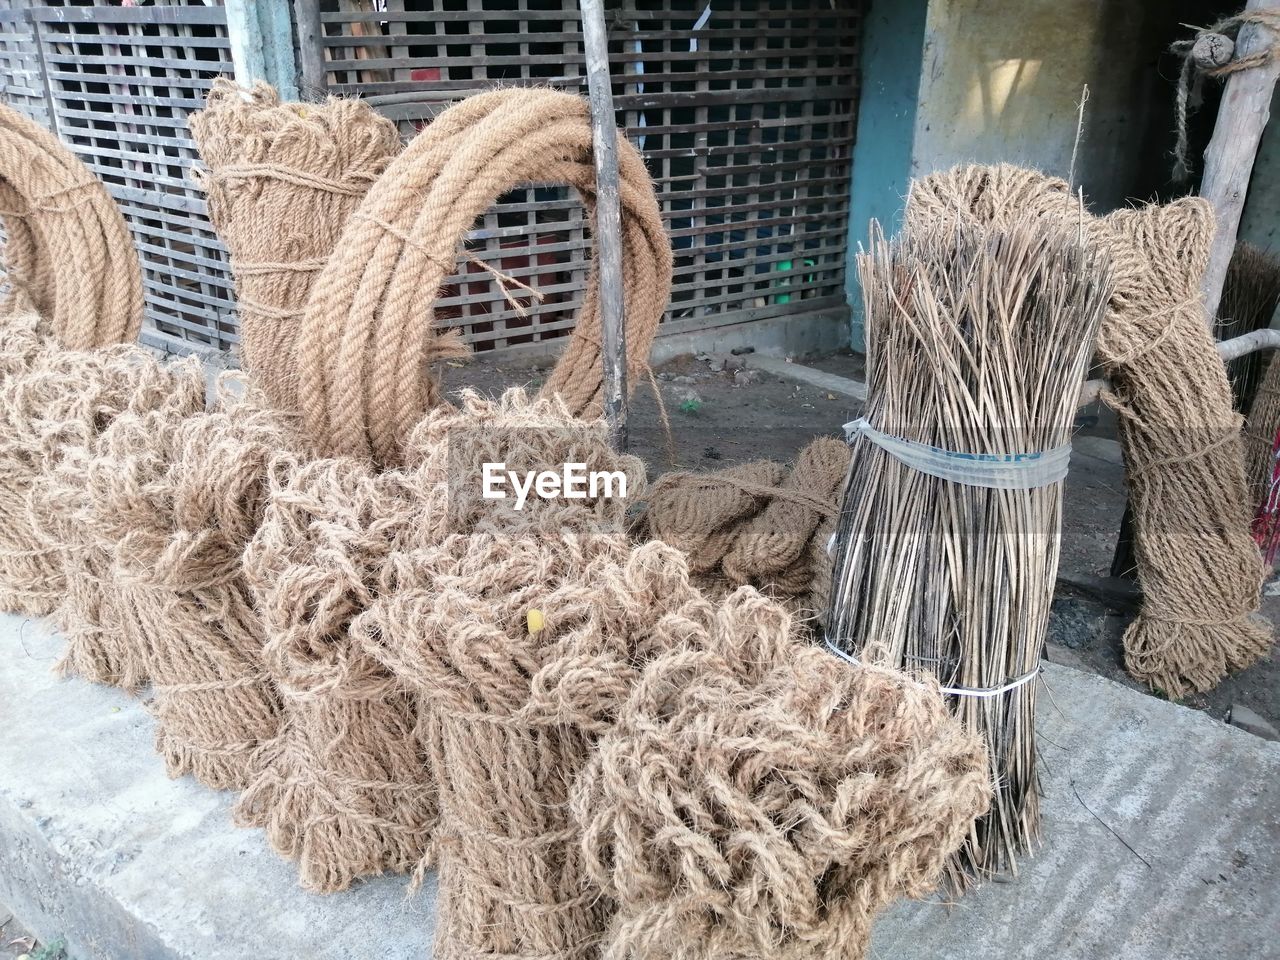 fishing industry, no people, fishing net, rope, fishing, day, large group of objects, art, basket, for sale, abundance, commercial fishing net, wood, high angle view, textile, container, still life, outdoors, tied up, business, market, straw